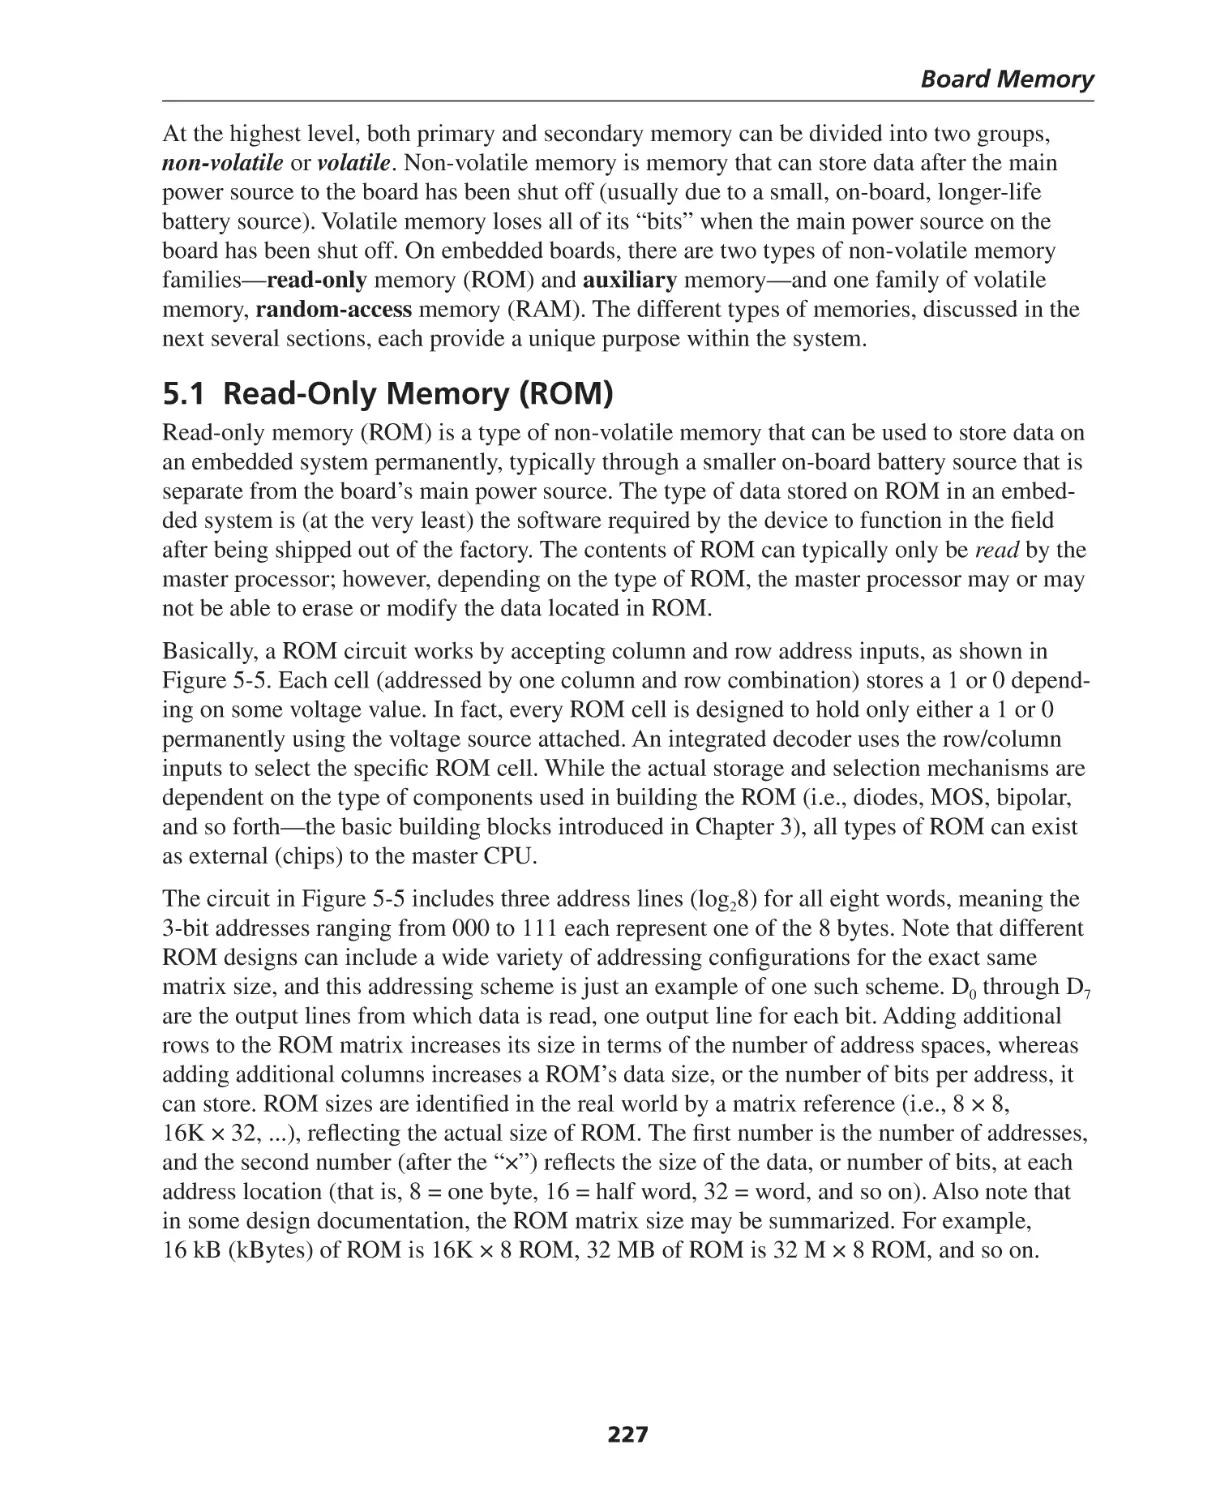 5.1 Read-Only Memory (ROM)